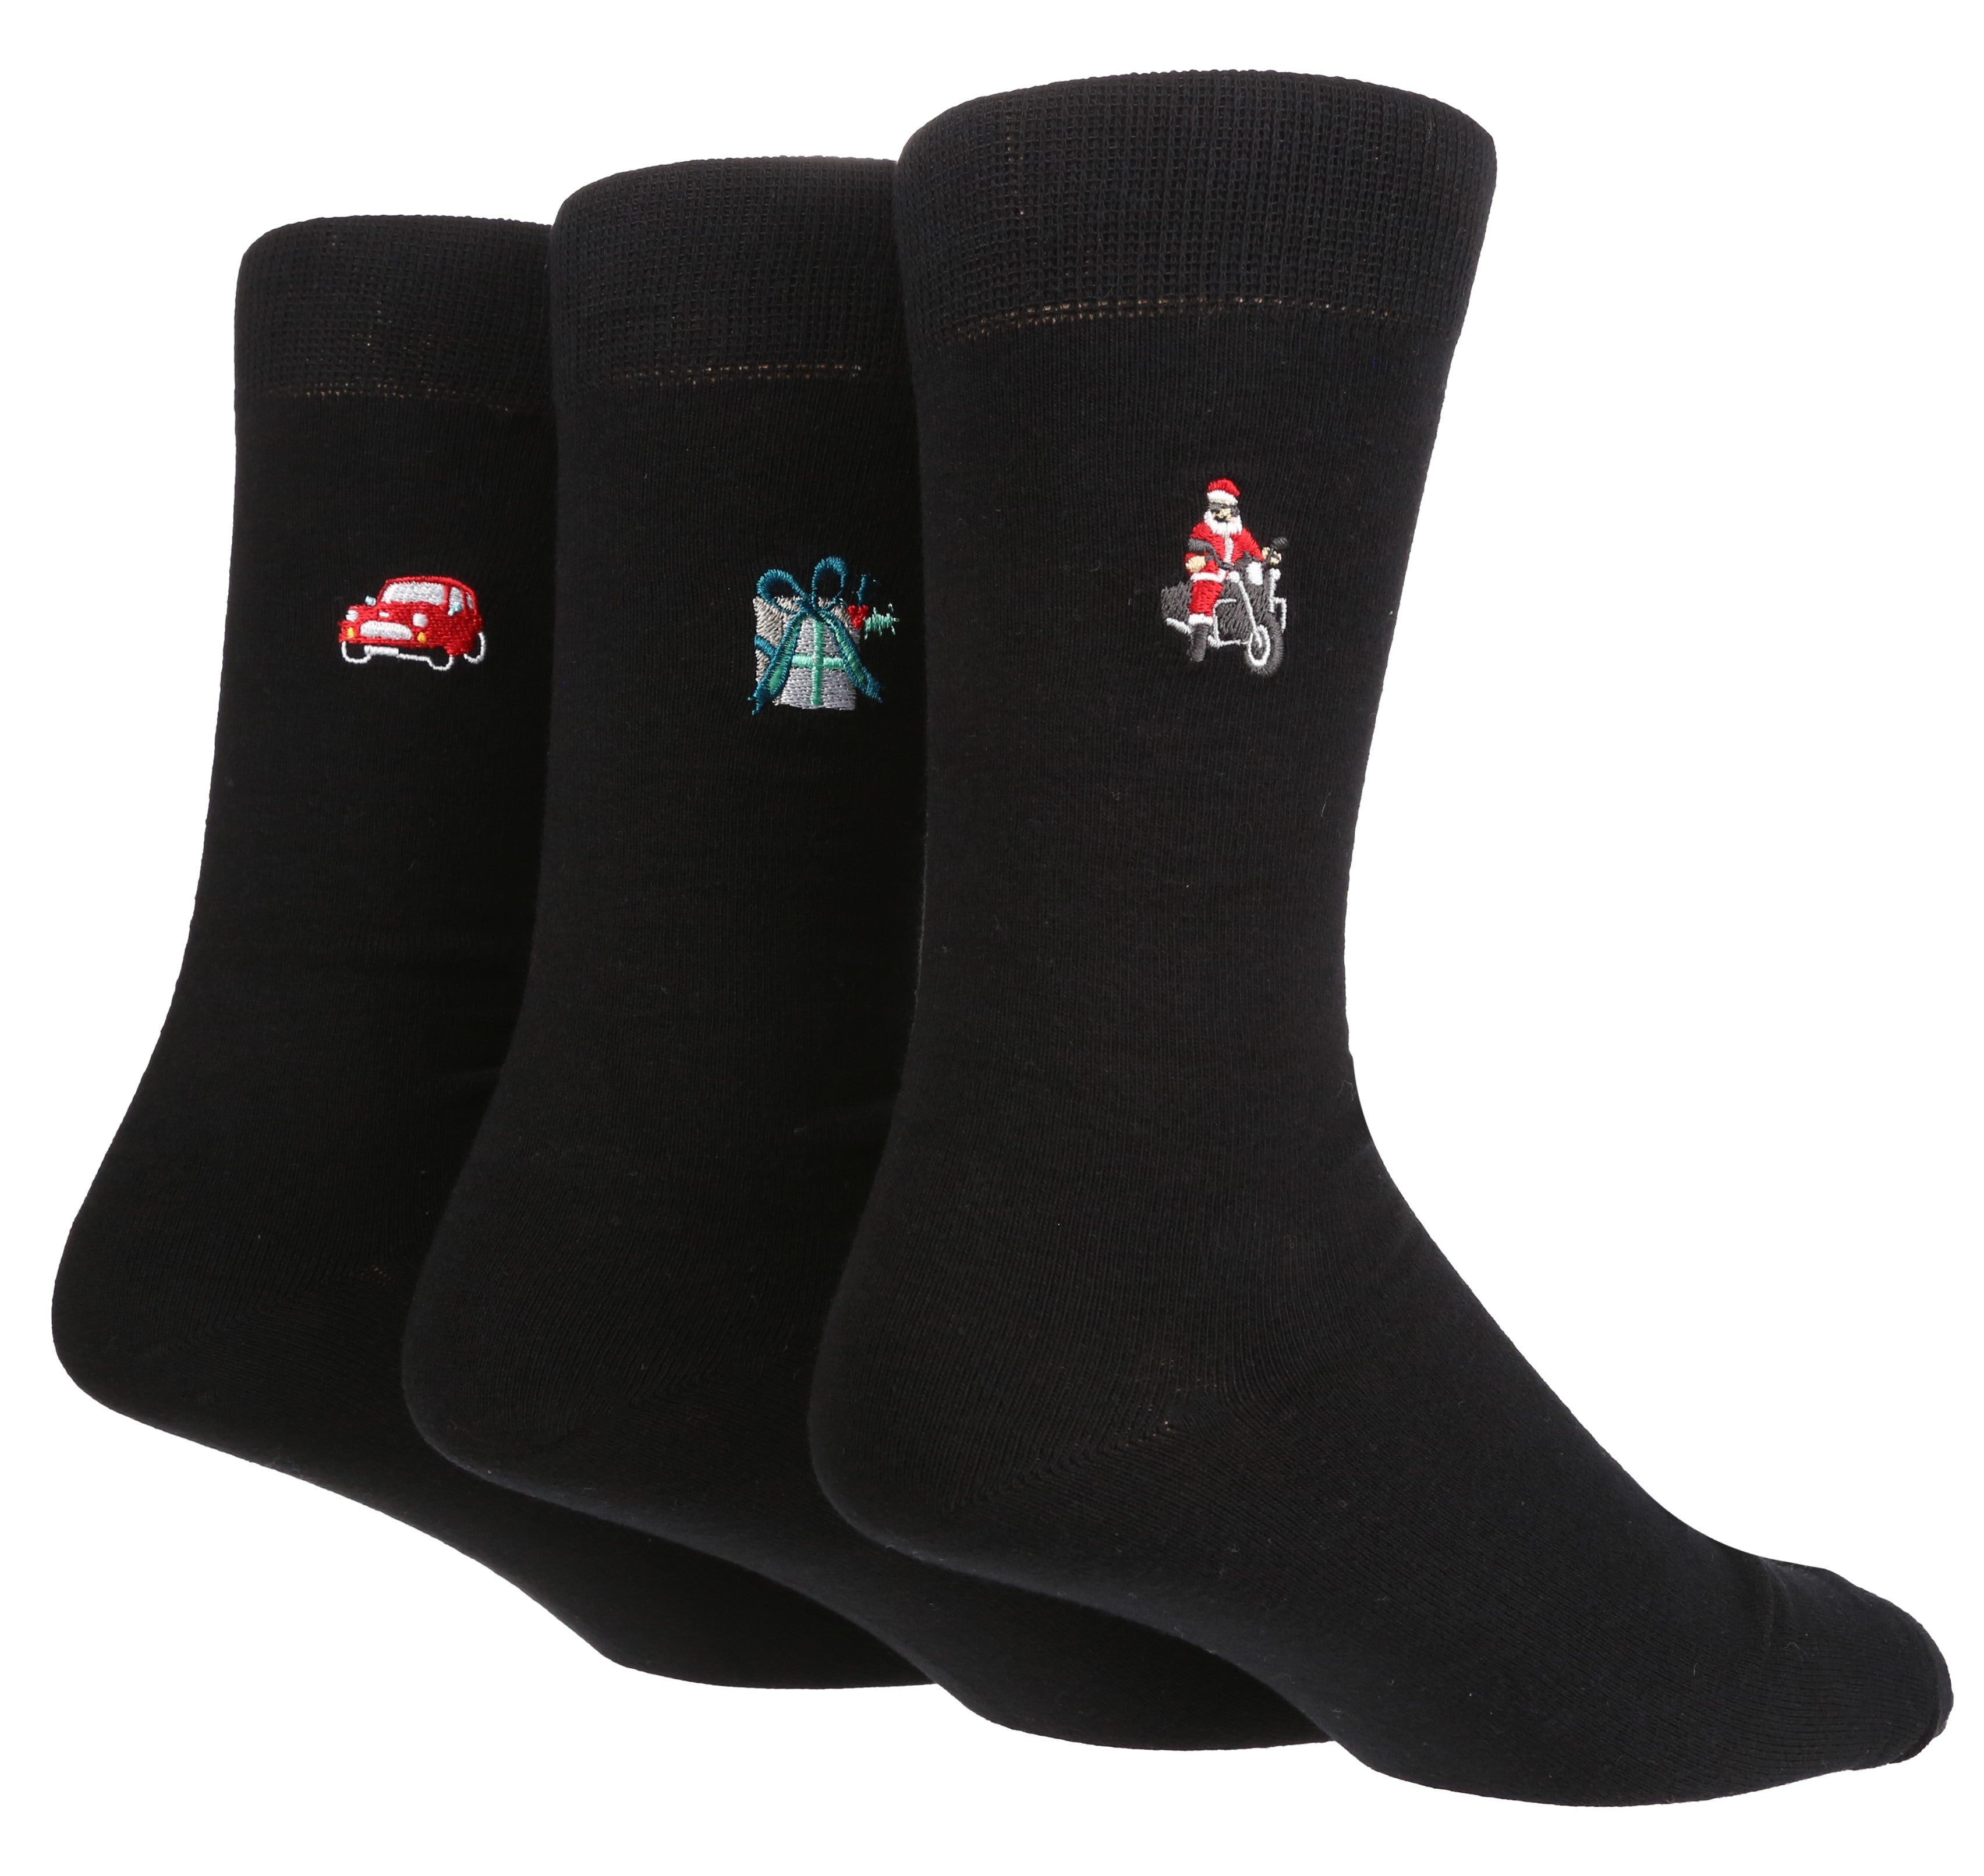 WILDFEET 3pk Embroided Christmas Cotton Novelty Crew - Mens 7-11